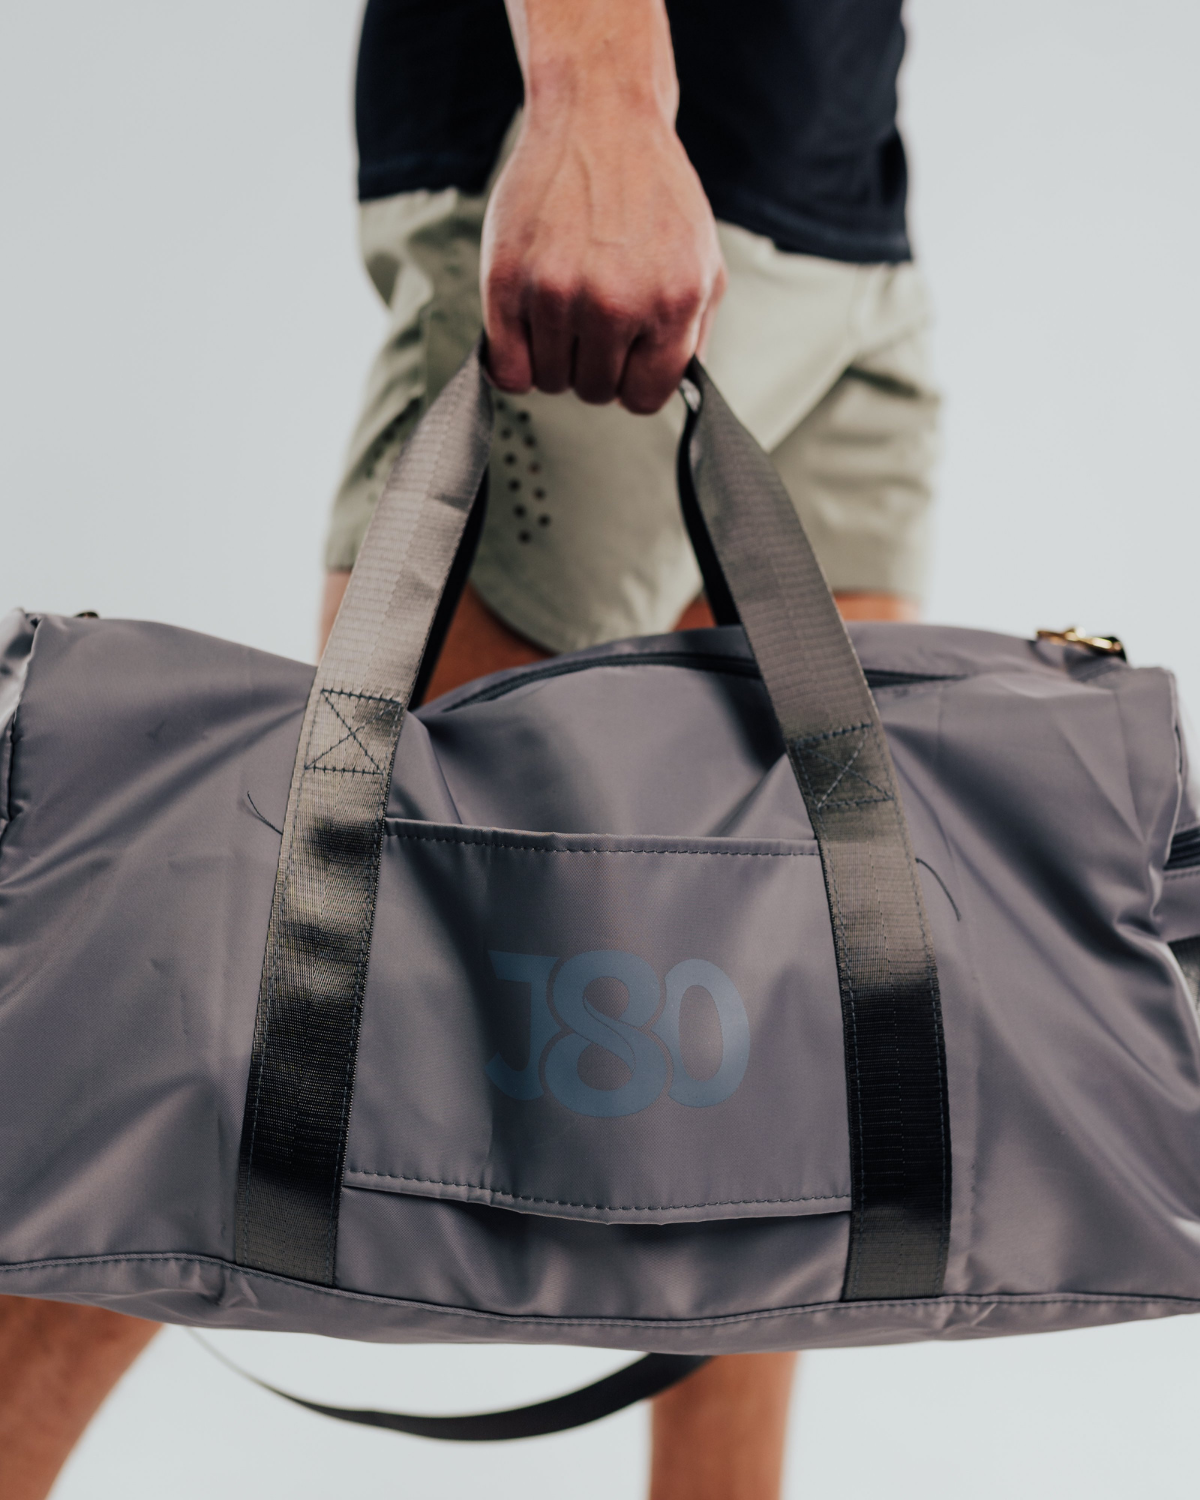 Level Up Duffle Bag, Best Gym Bags